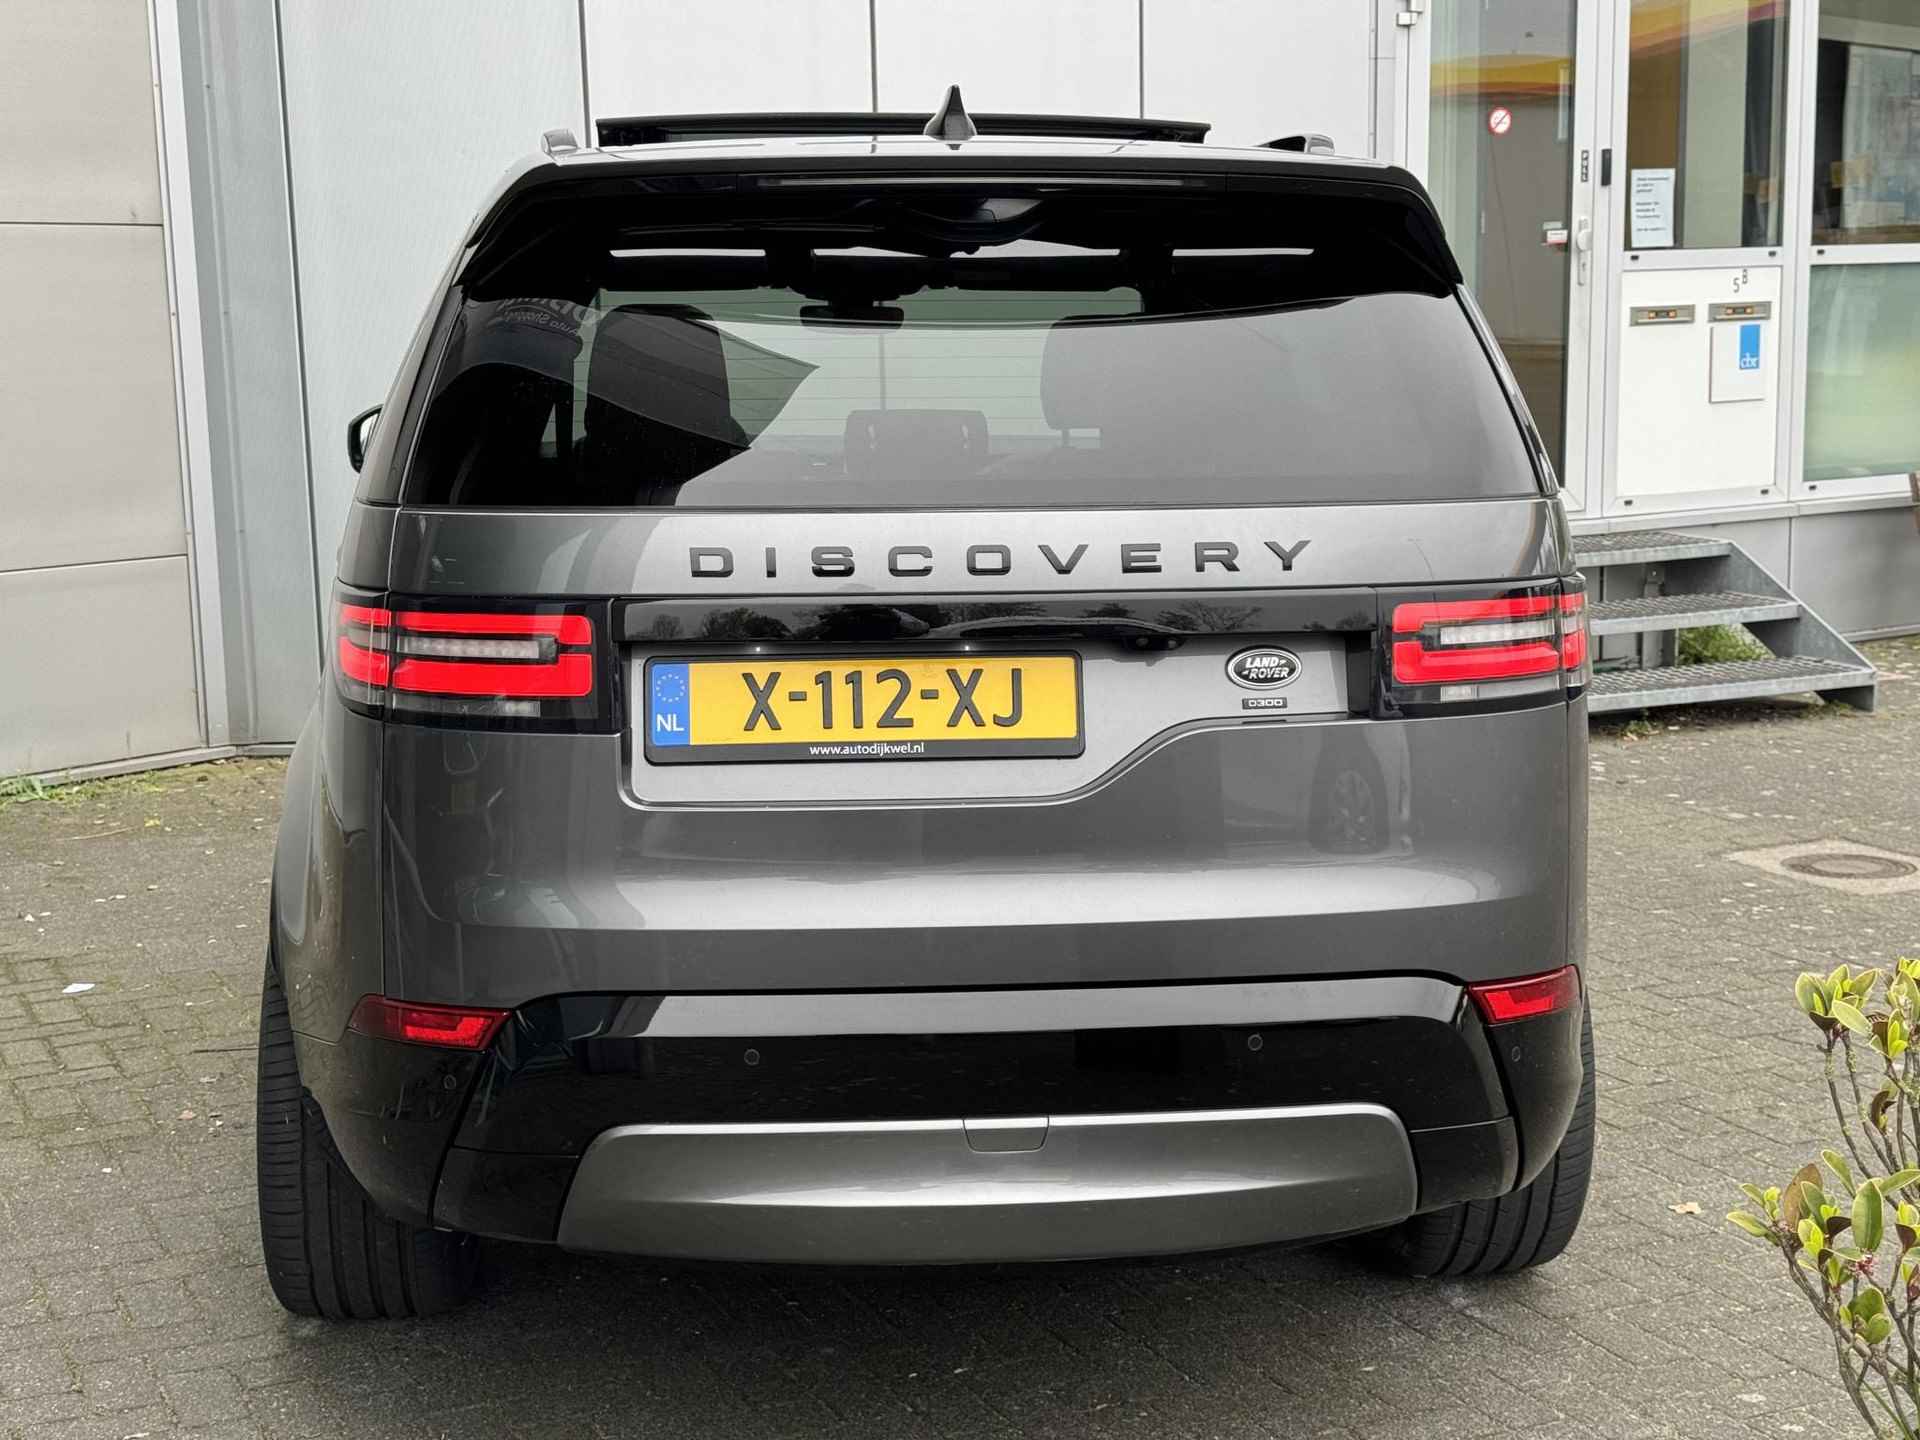 Land Rover Discovery 3.0 Td6 HSE 7p. redifined by Dijkwel - 18/28